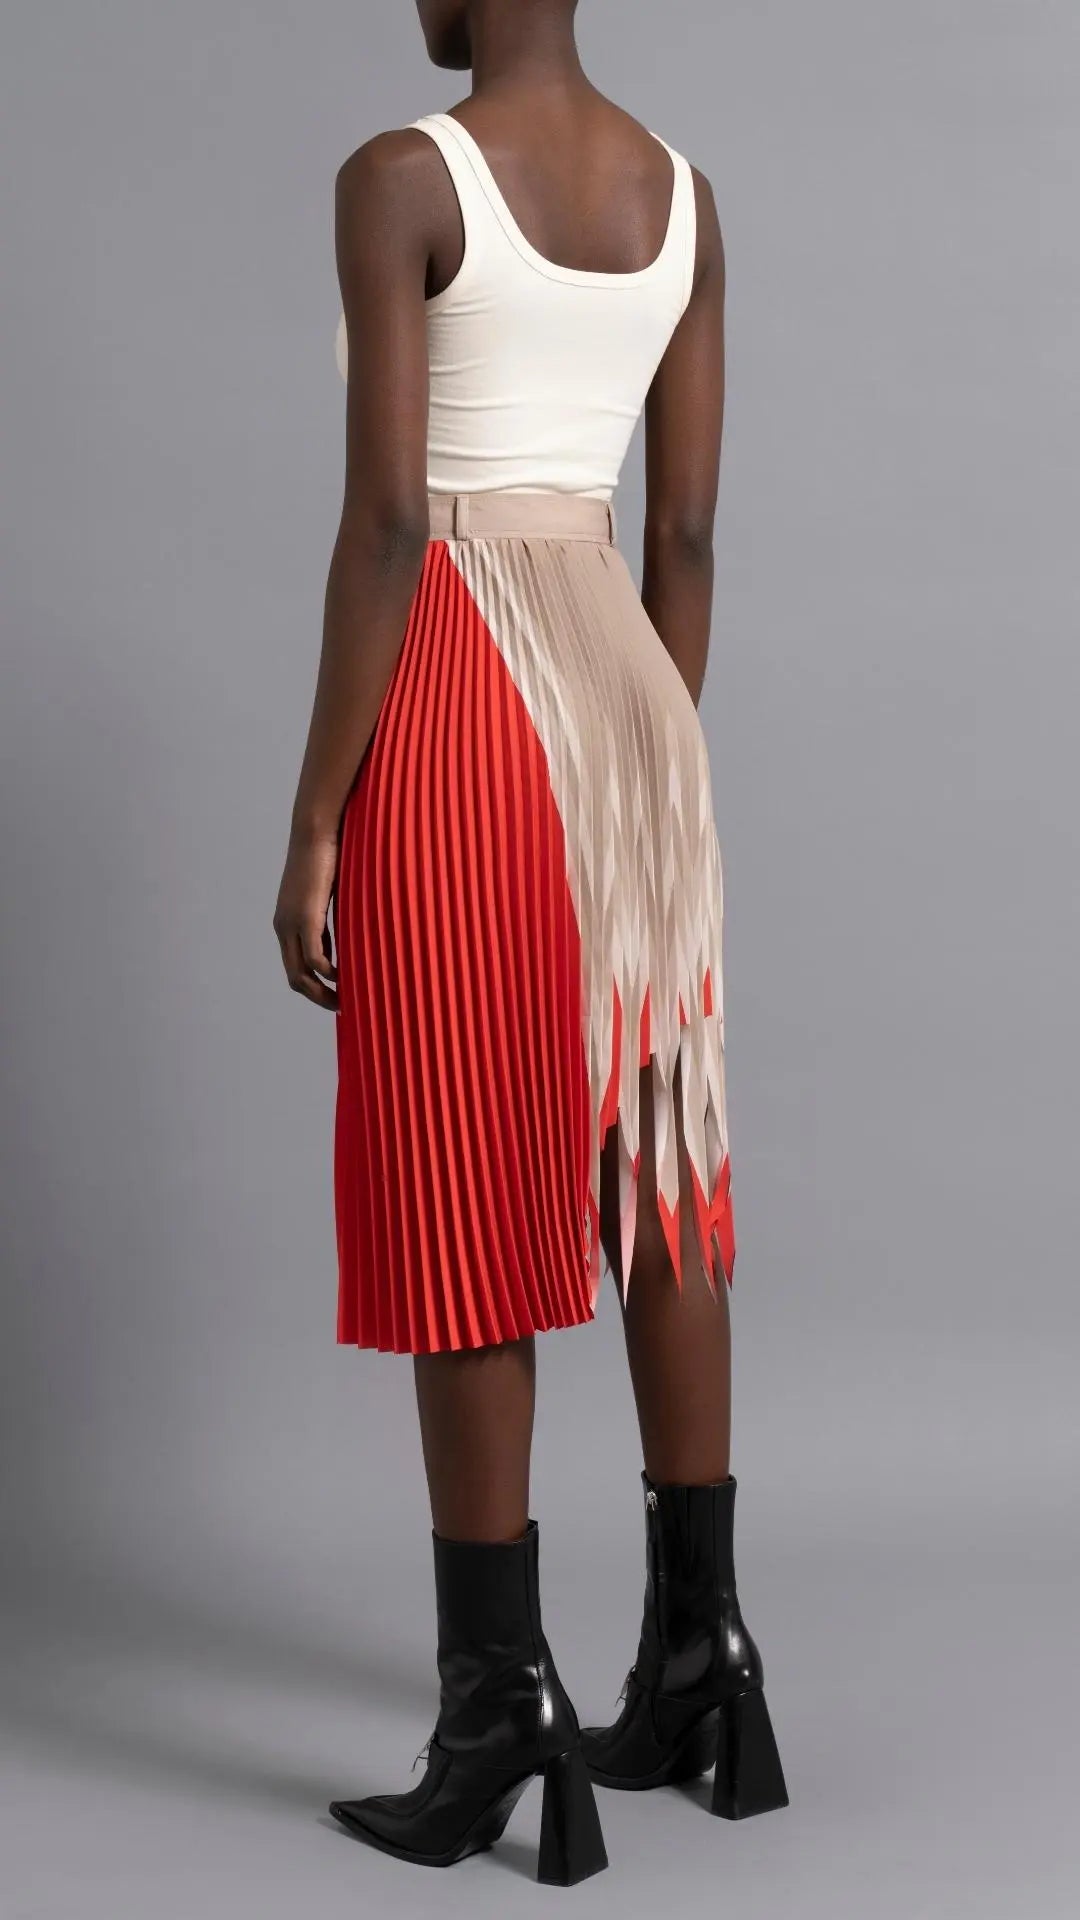 Thebe Magugu Shredded Pleated Skirt. Signature Thebe Magugu pleated skirt but with an asymmetrical twist in ecru, white and red. Shown on model facing back.